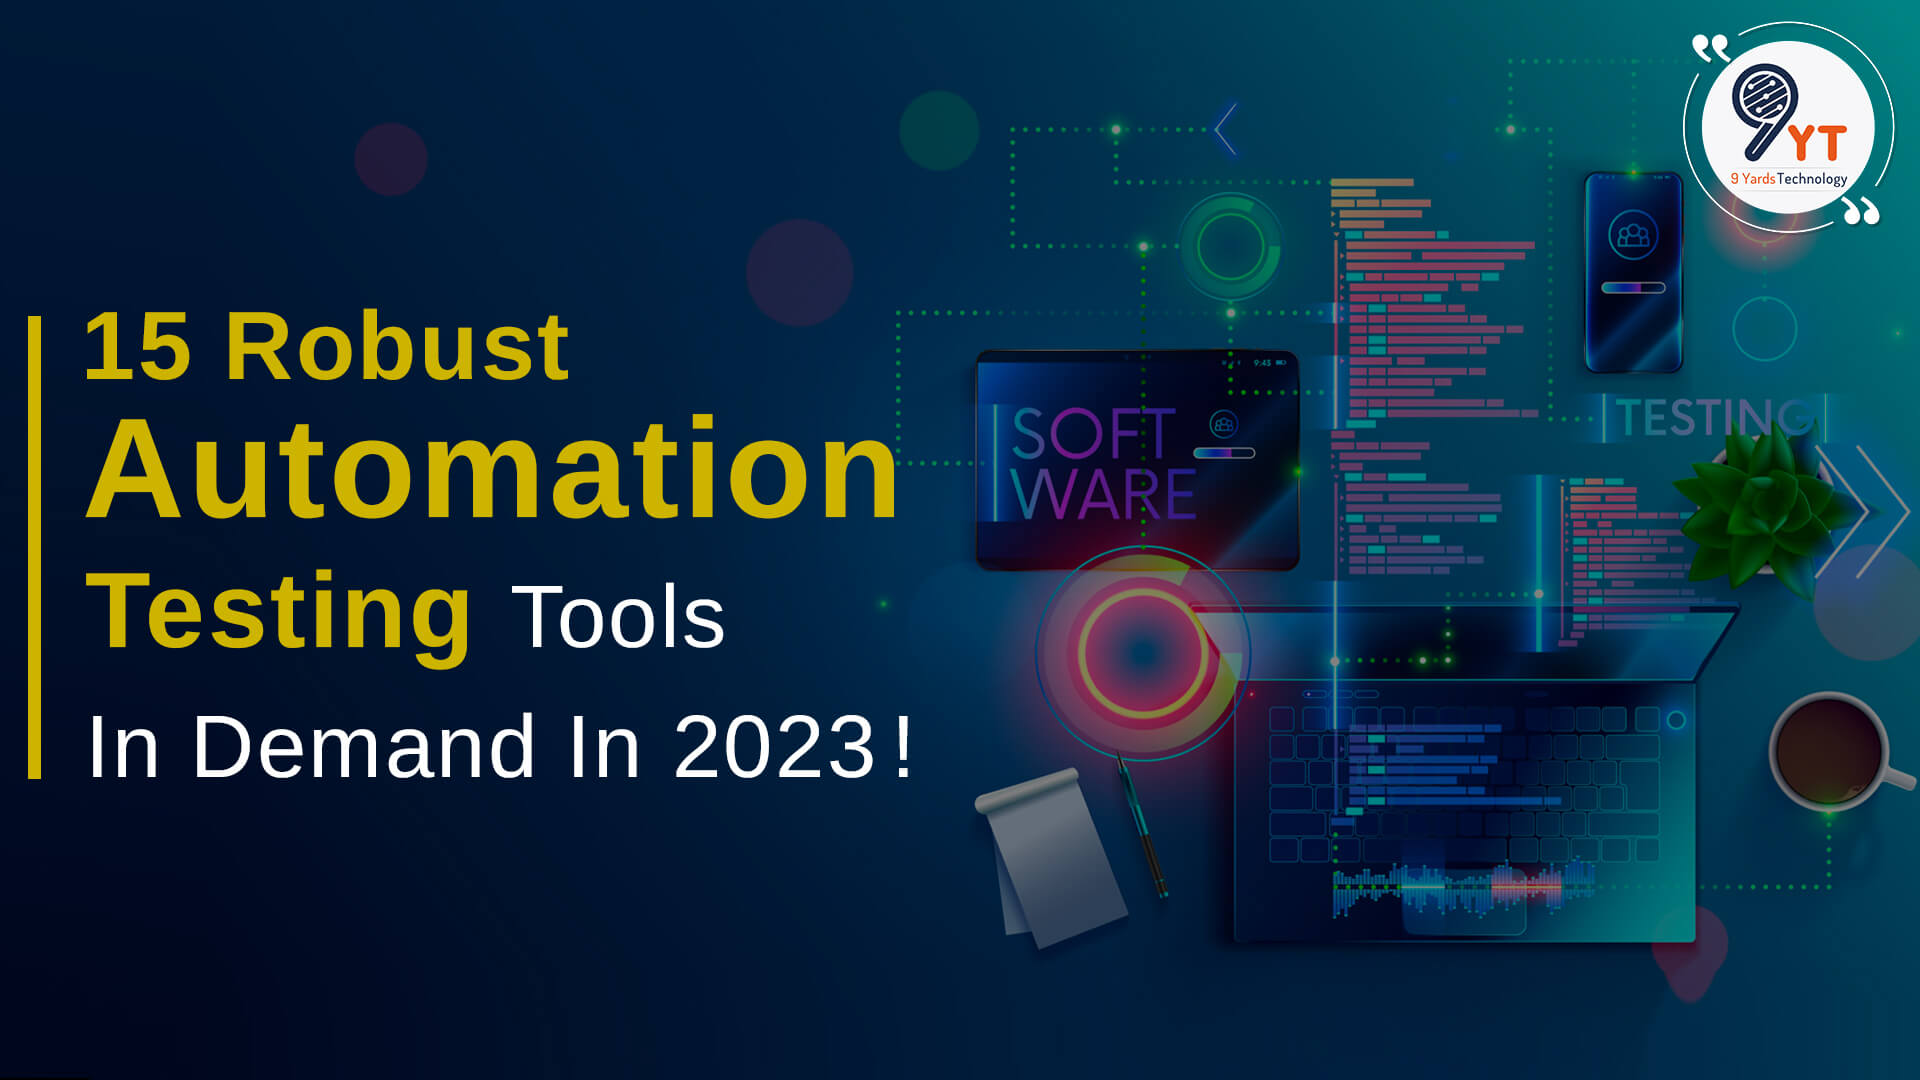 15 Robust Automation Testing Tools in Demand in 2023- Ultimate Guide!